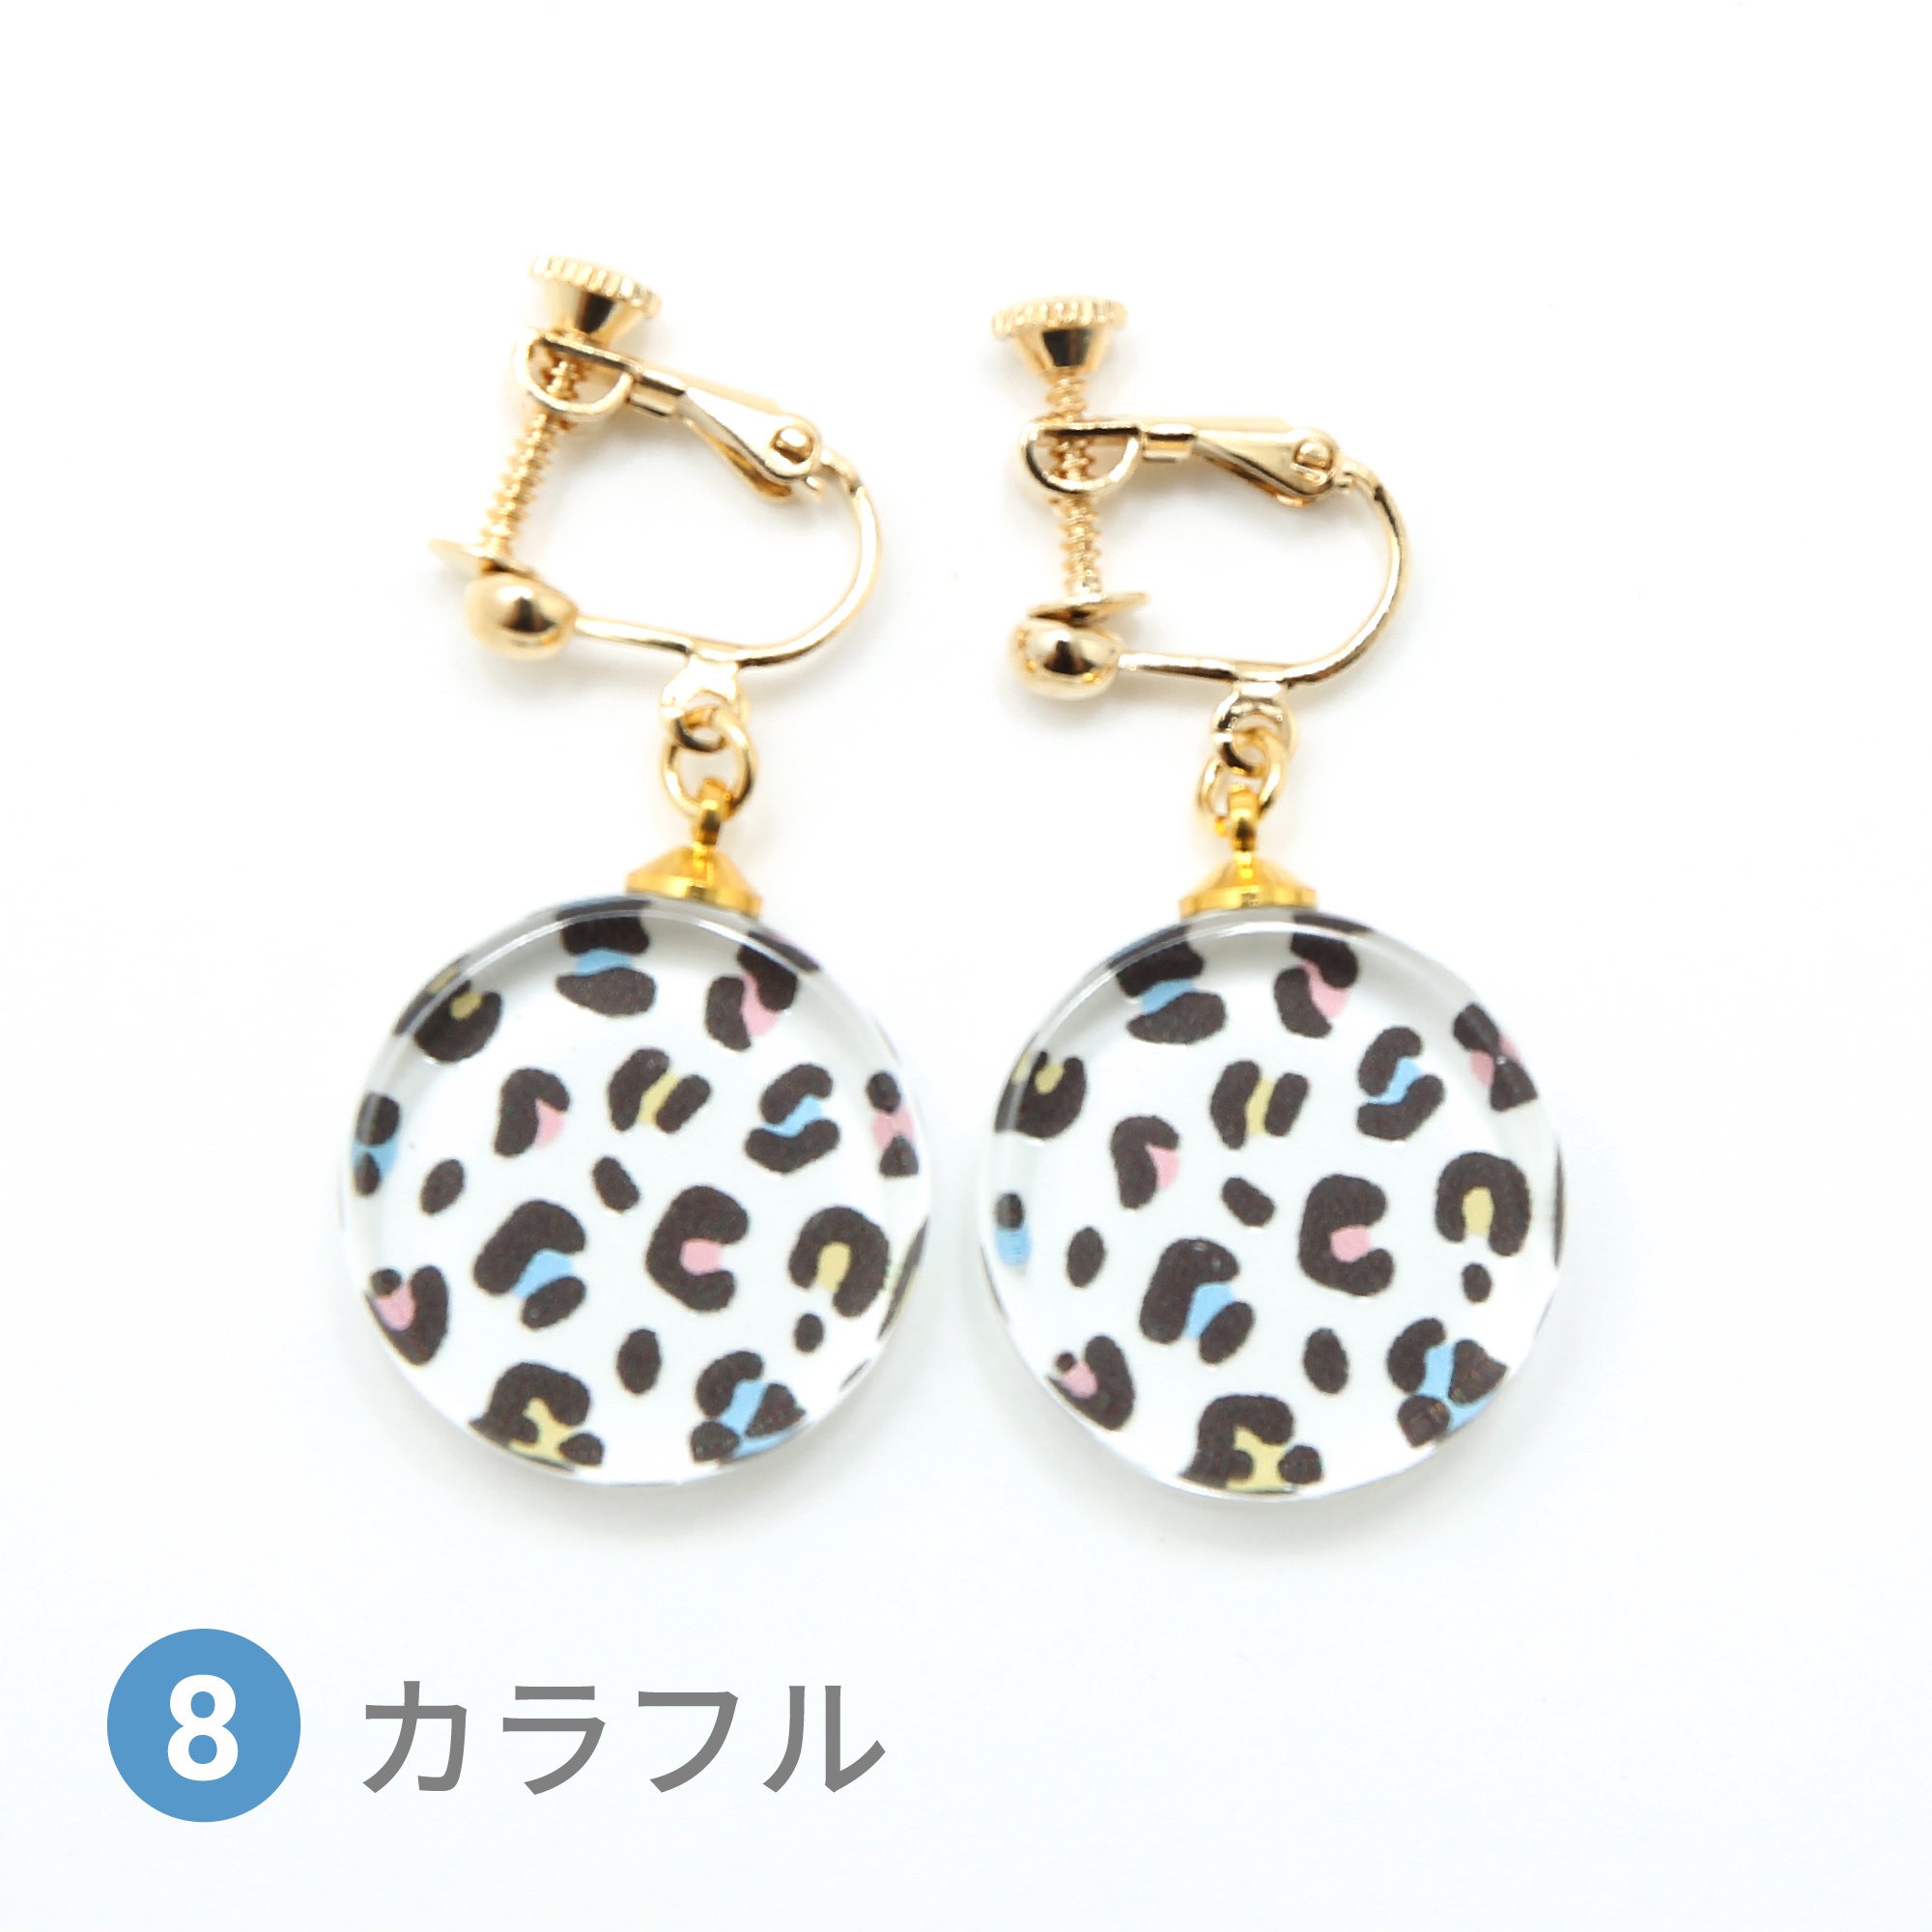 Glass accessories Earring LEOPARD colorful round shape